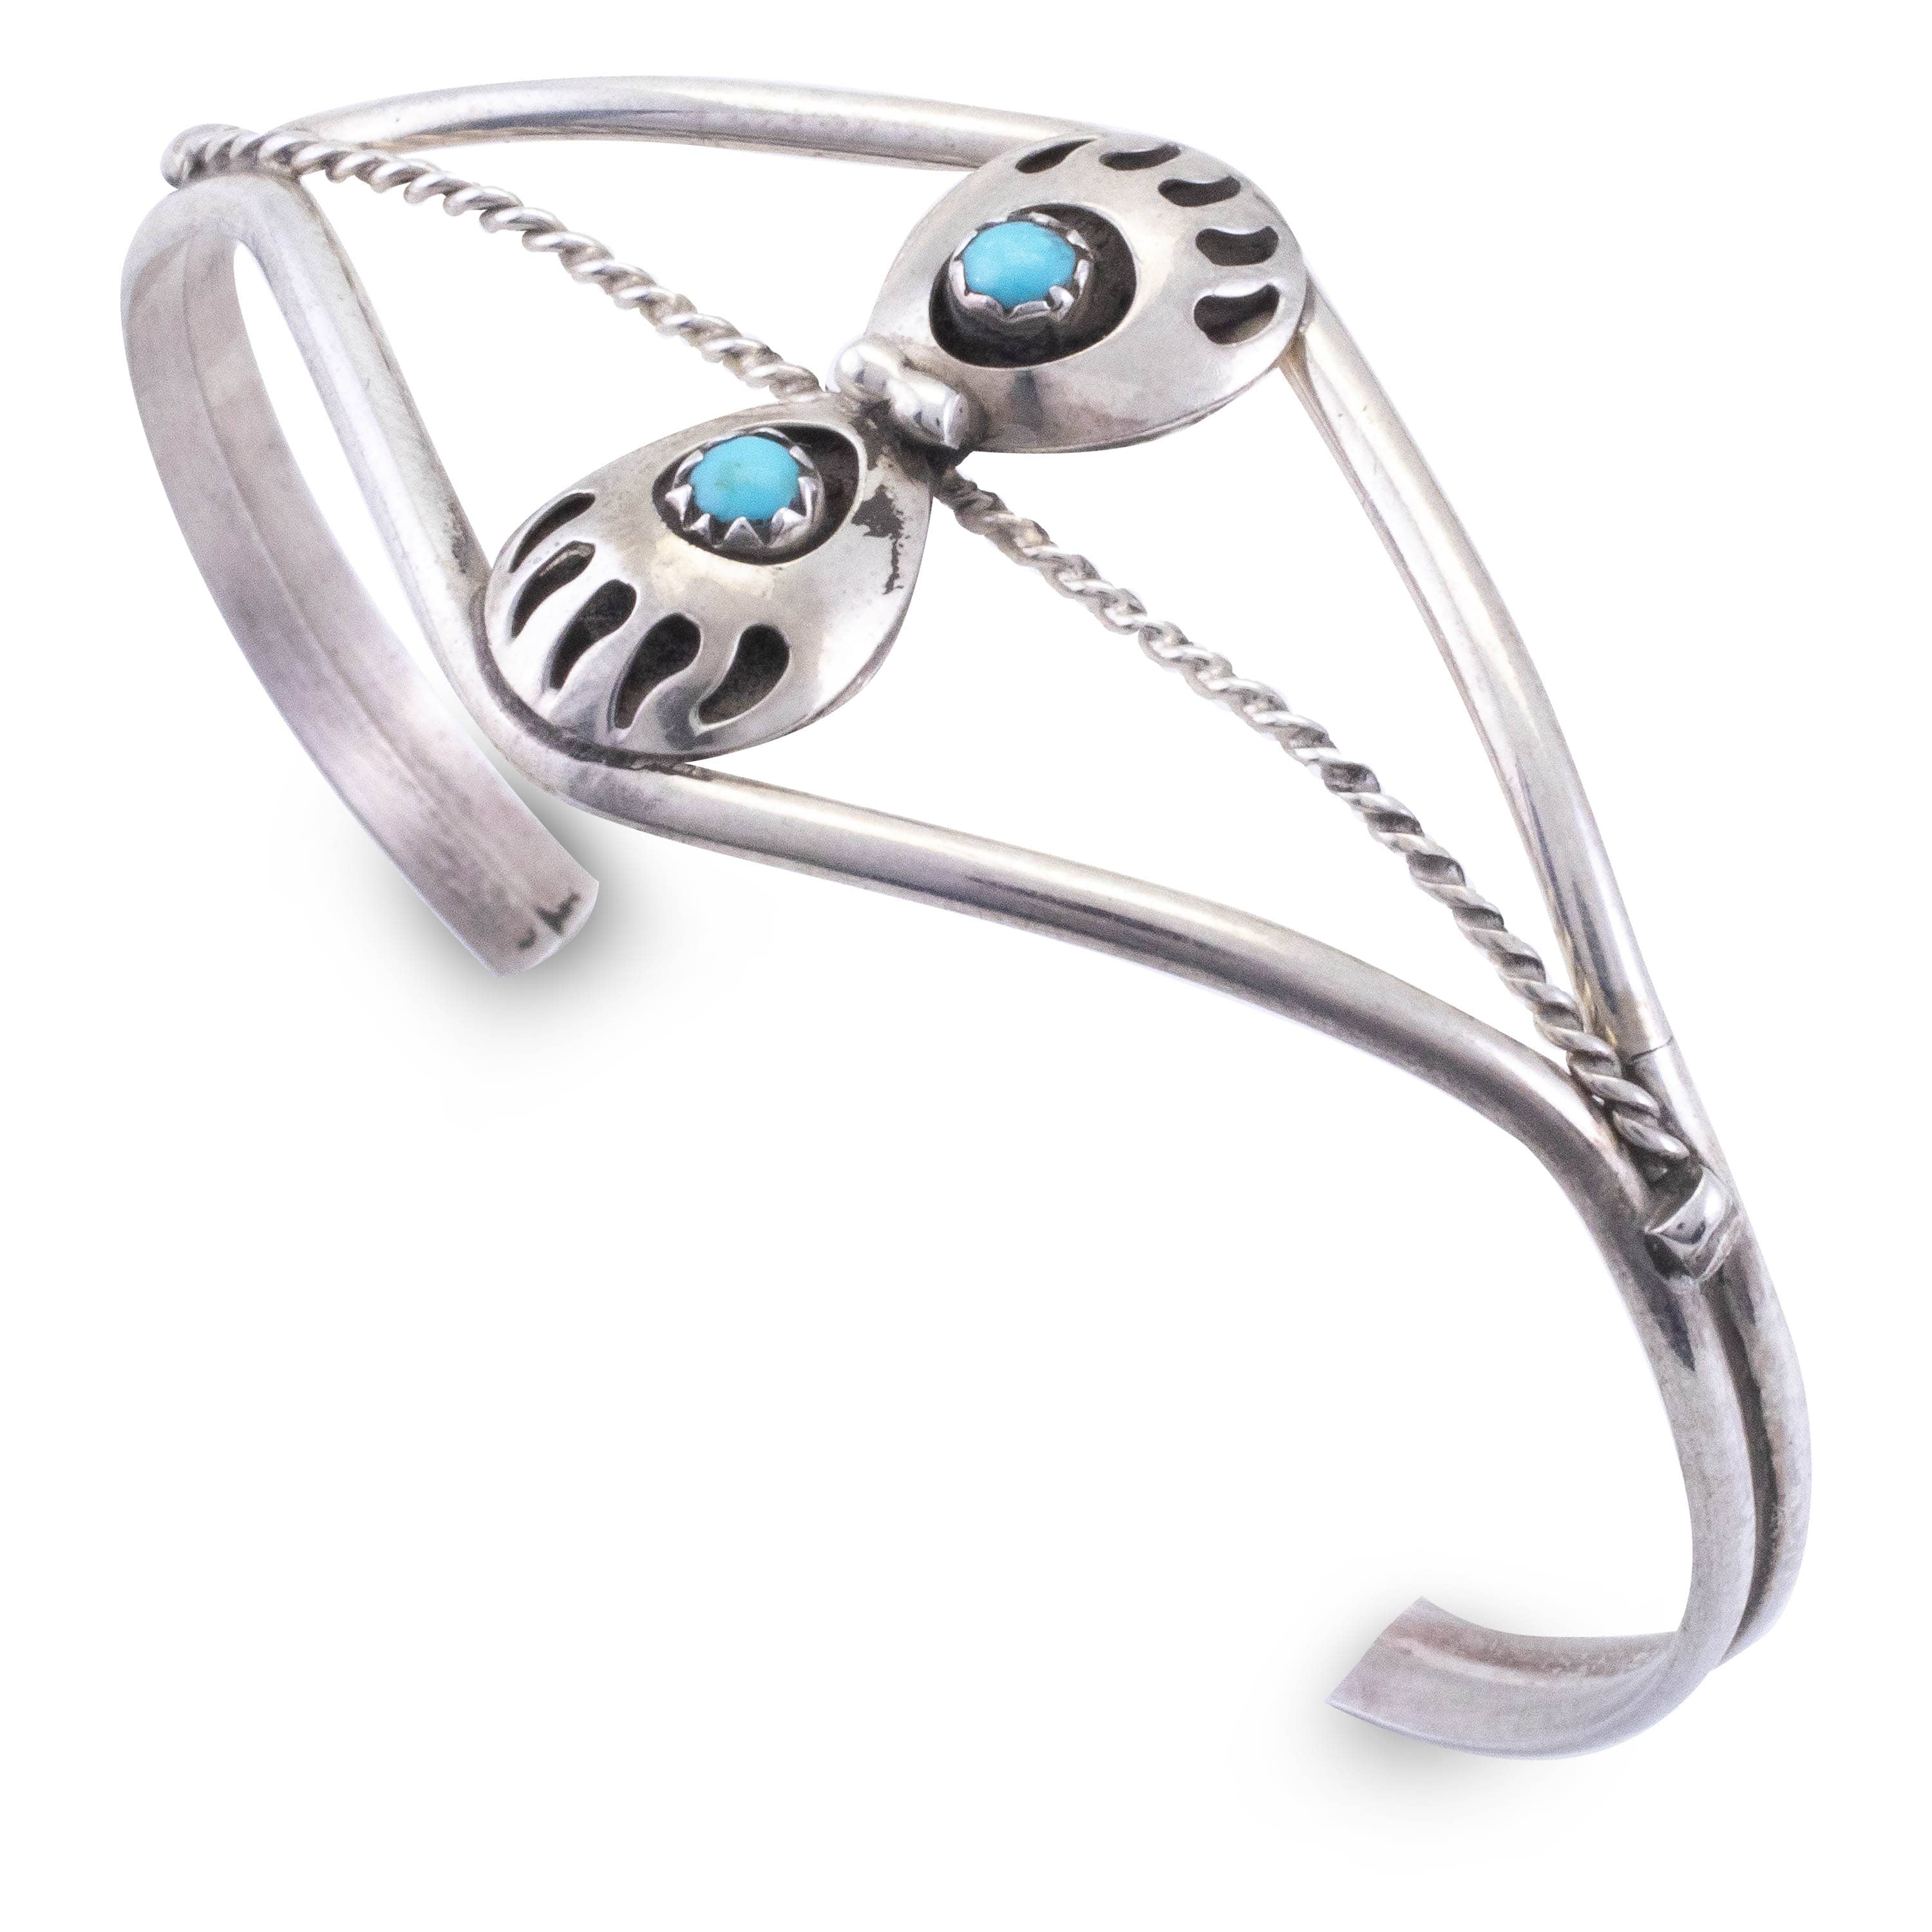 Kalifano Native American Jewelry Sleeping Beauty Turquoise Double Bear Claw USA Native American Made 925 Sterling Silver Cuff NAB160.003